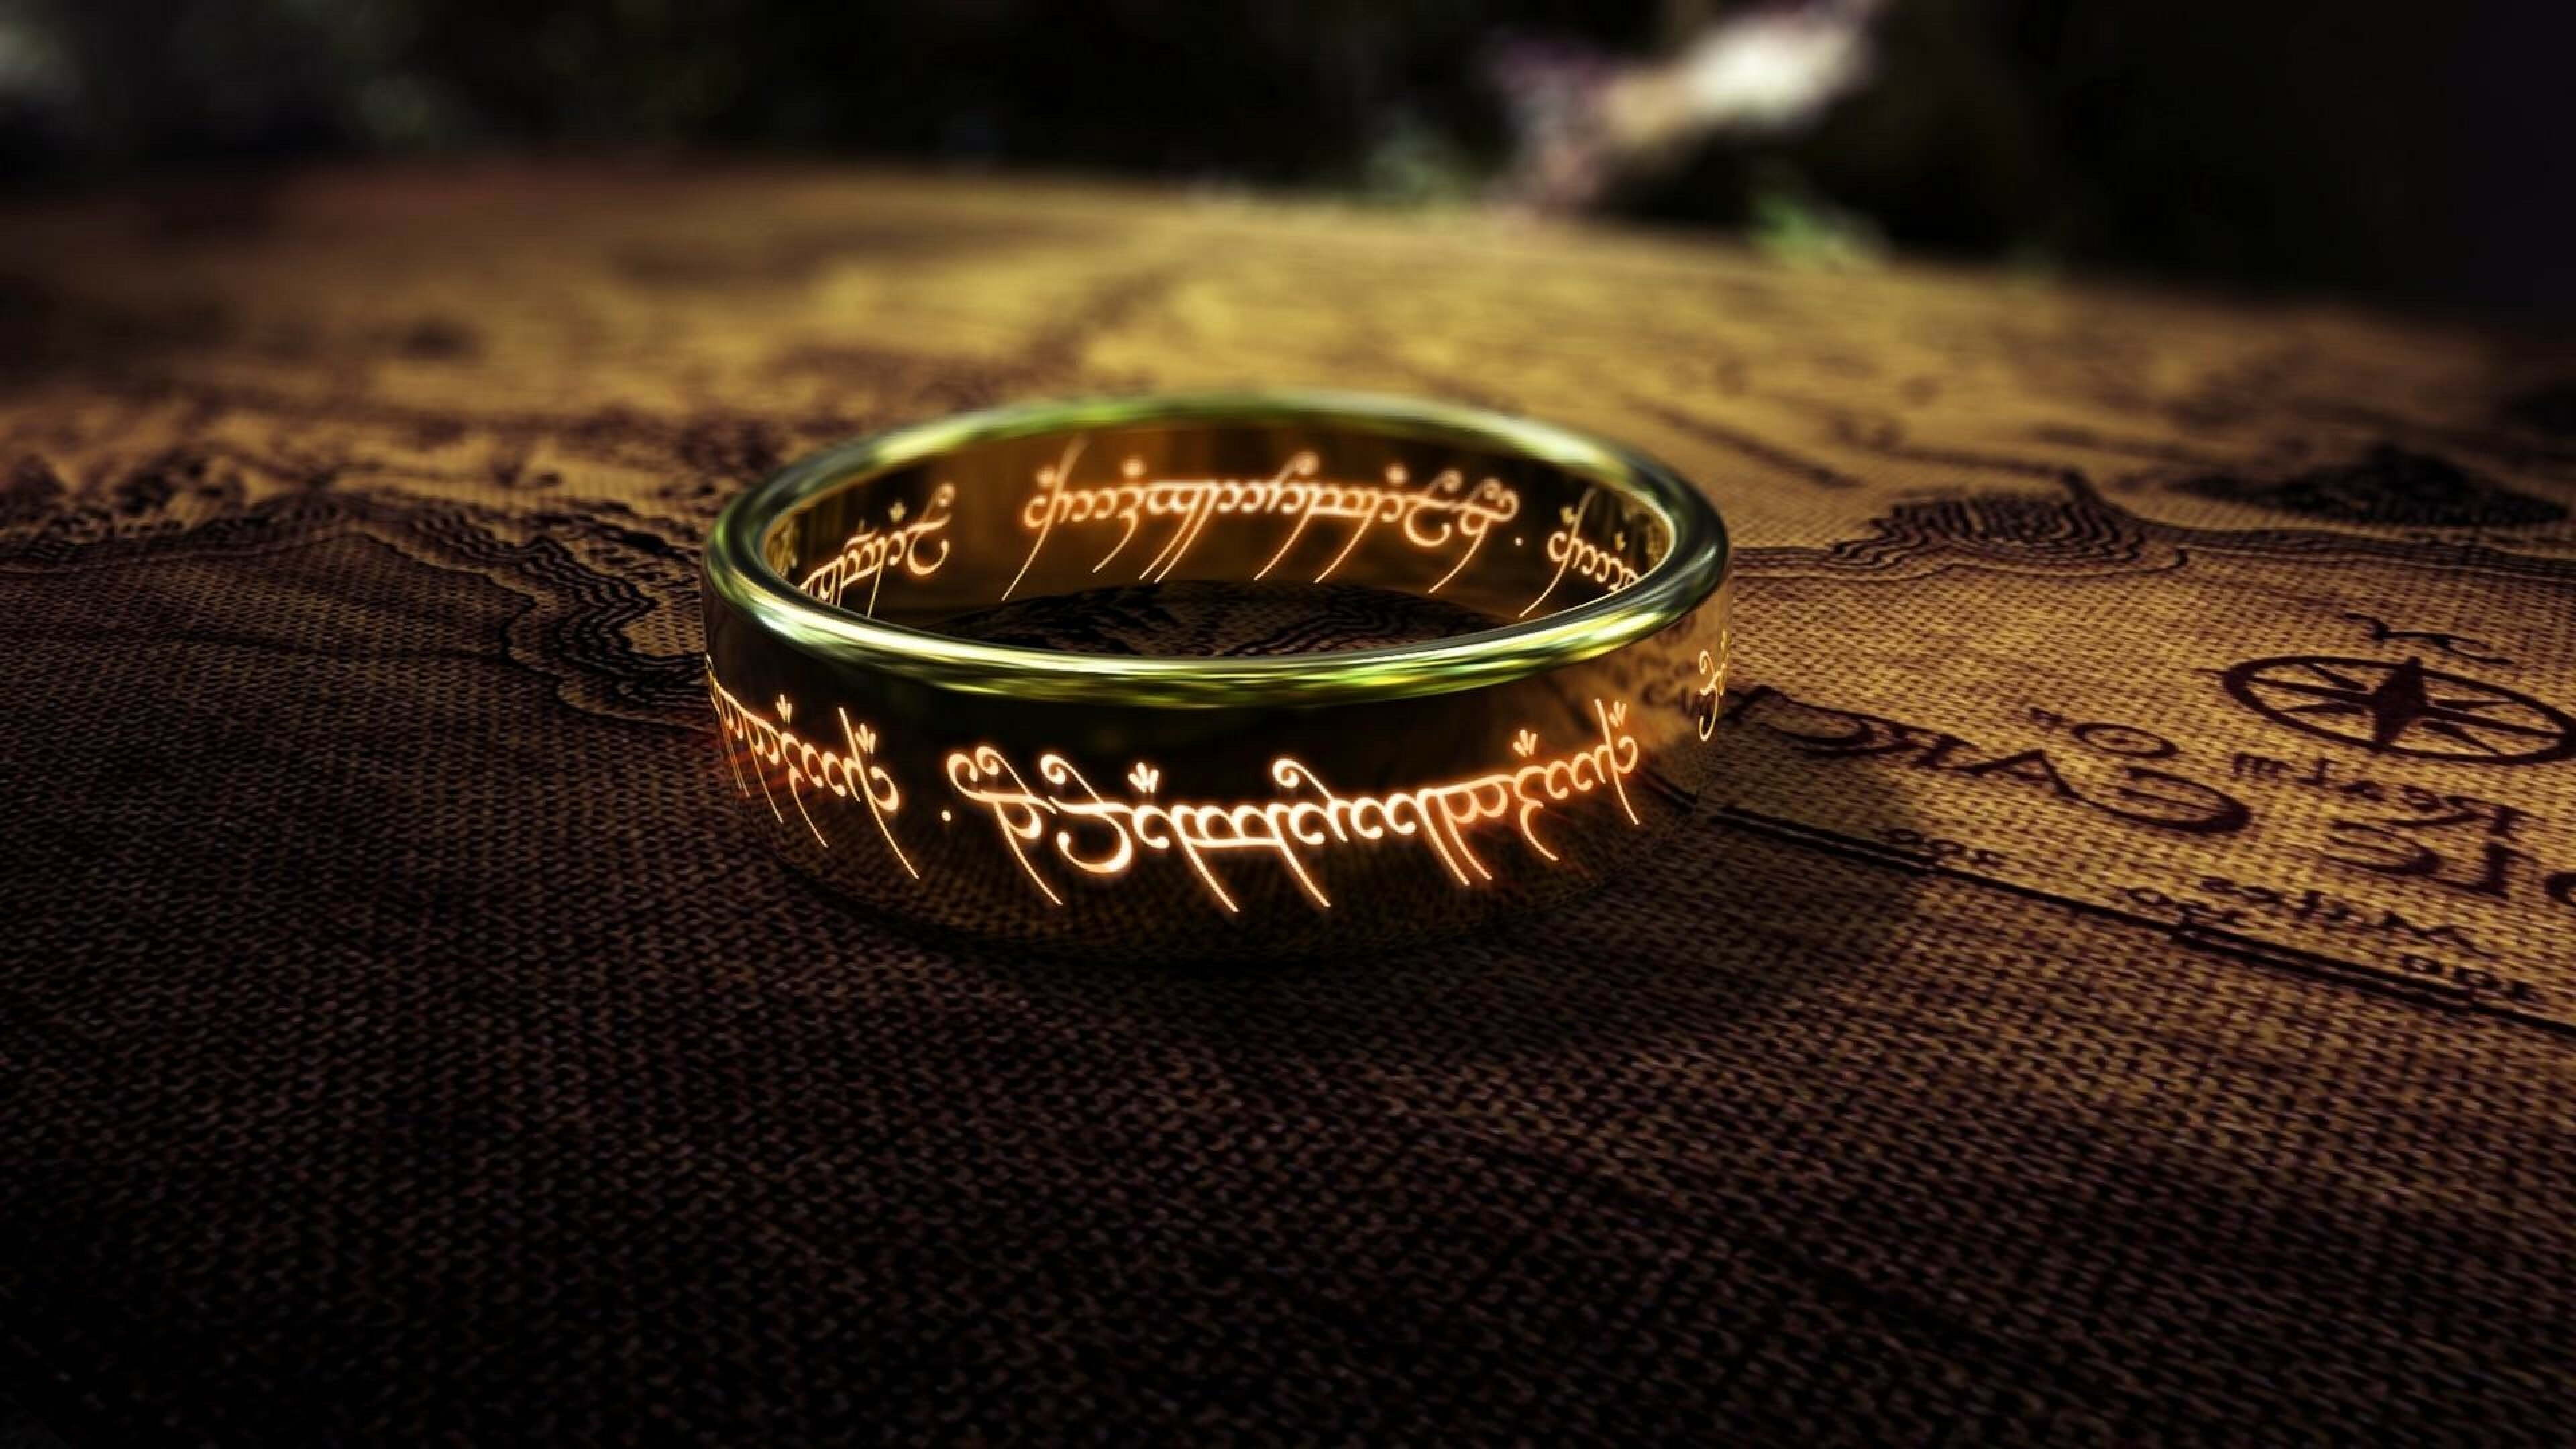 The Lord of the Rings: The Ruling Ring and Isildur's Bane, First appeared in the earlier story The Hobbit (1937). 3840x2160 4K Wallpaper.